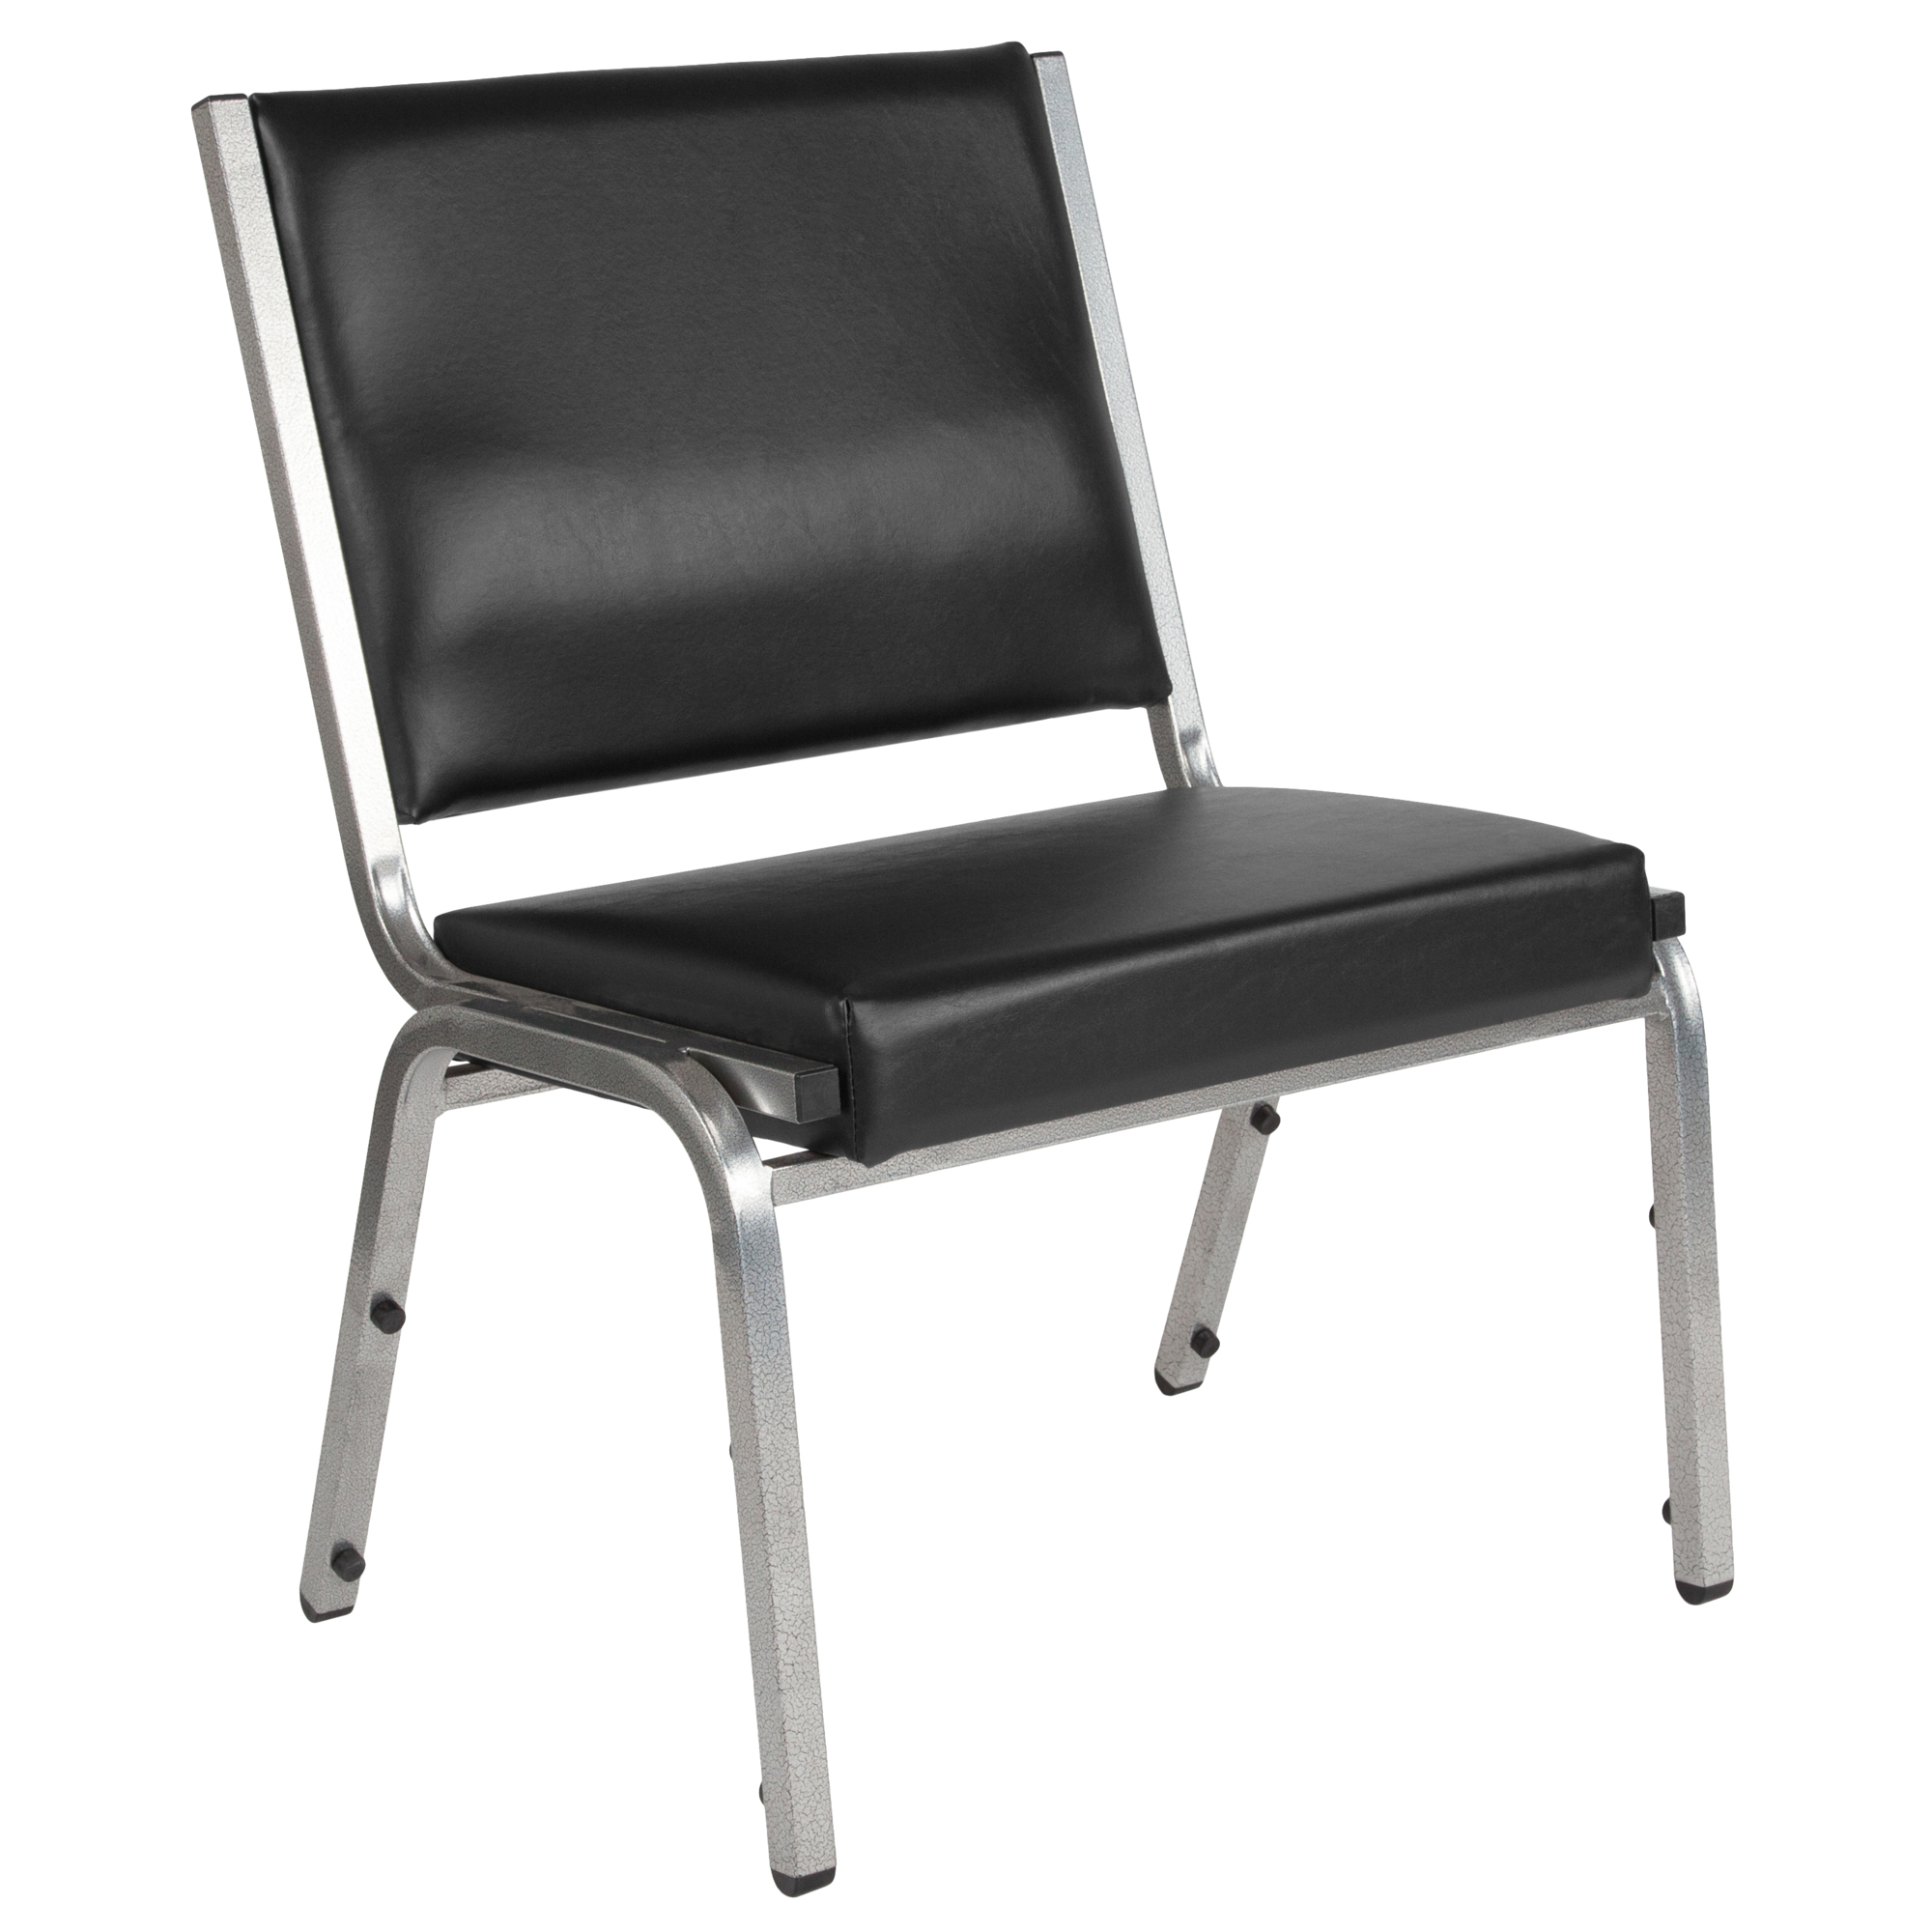 Flash Furniture, 1000 lb. Rated Black Vinyl Bariatric Chair, Primary Color Black, Included (qty.) 1, Model XU604426601BV